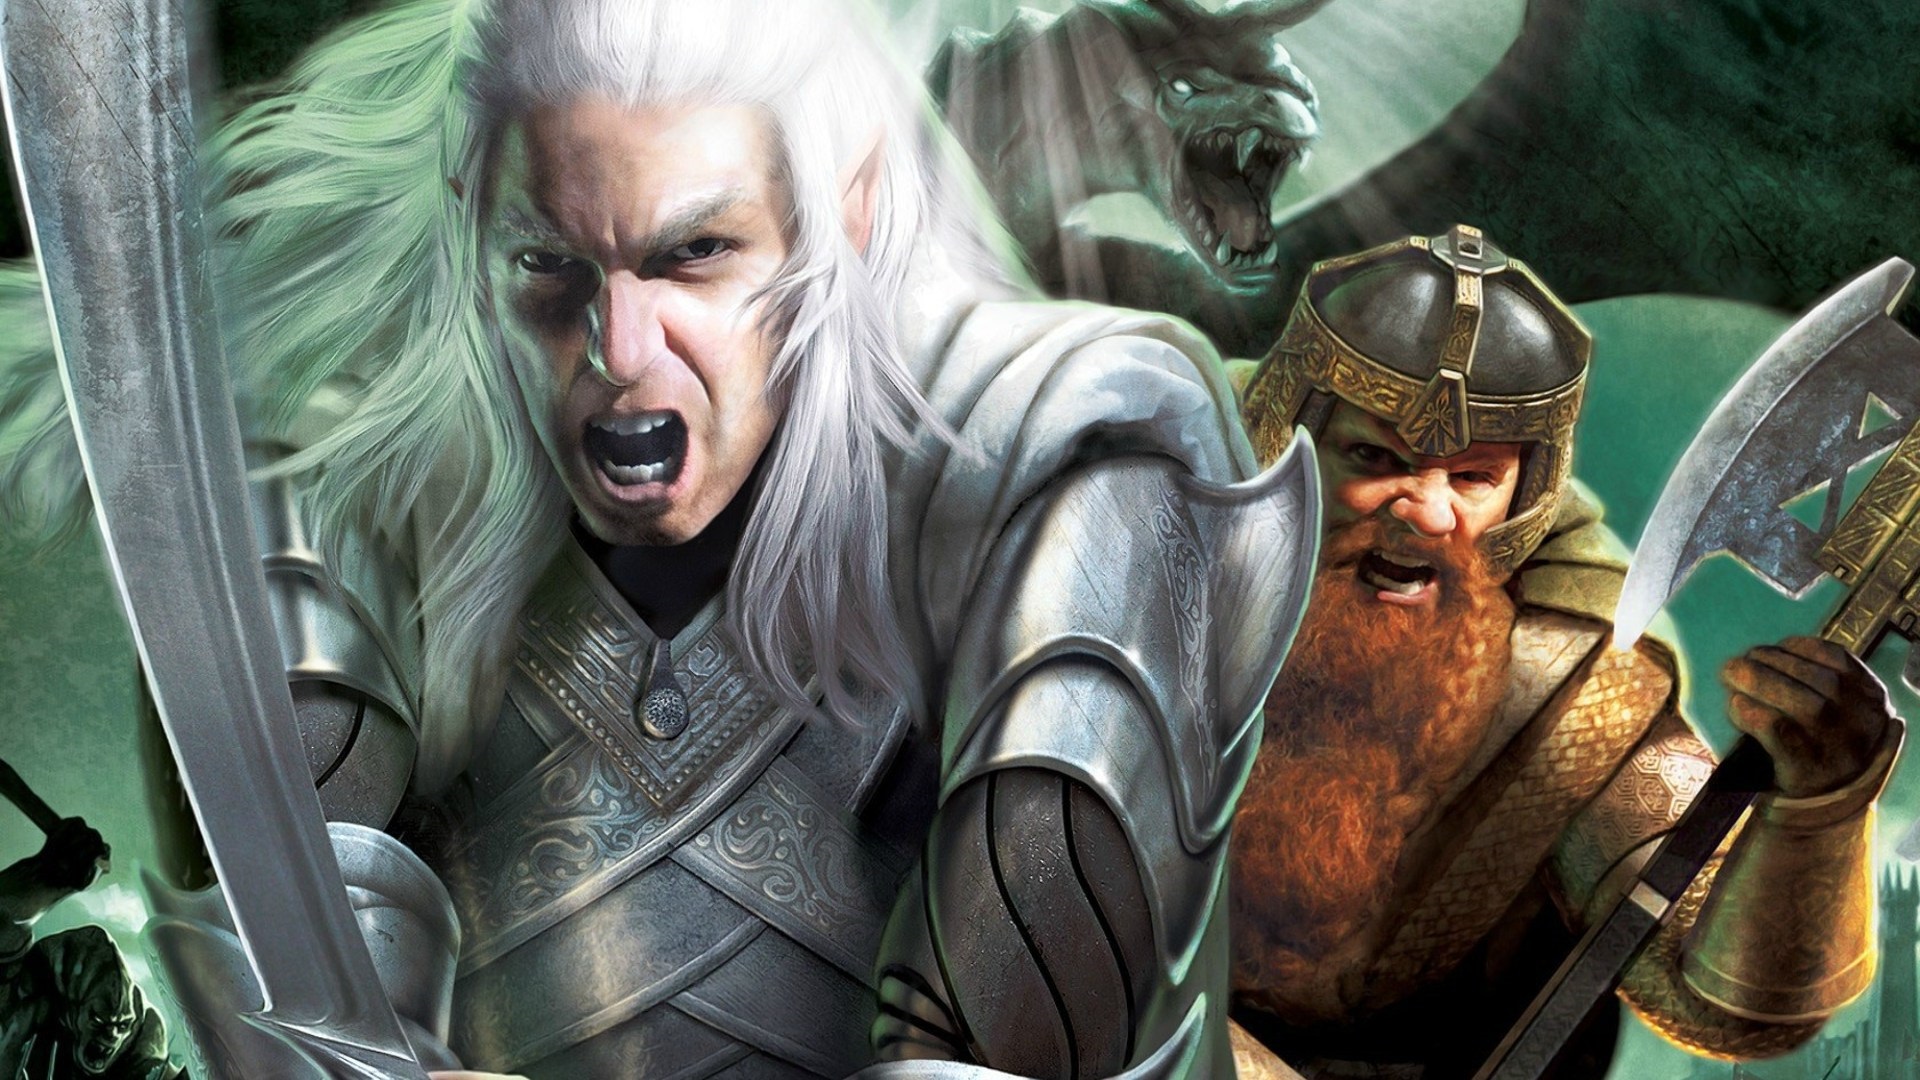 [16+] Прохождение The Lord of the Rings: The Battle for Middle-earth II. Эпизод 2